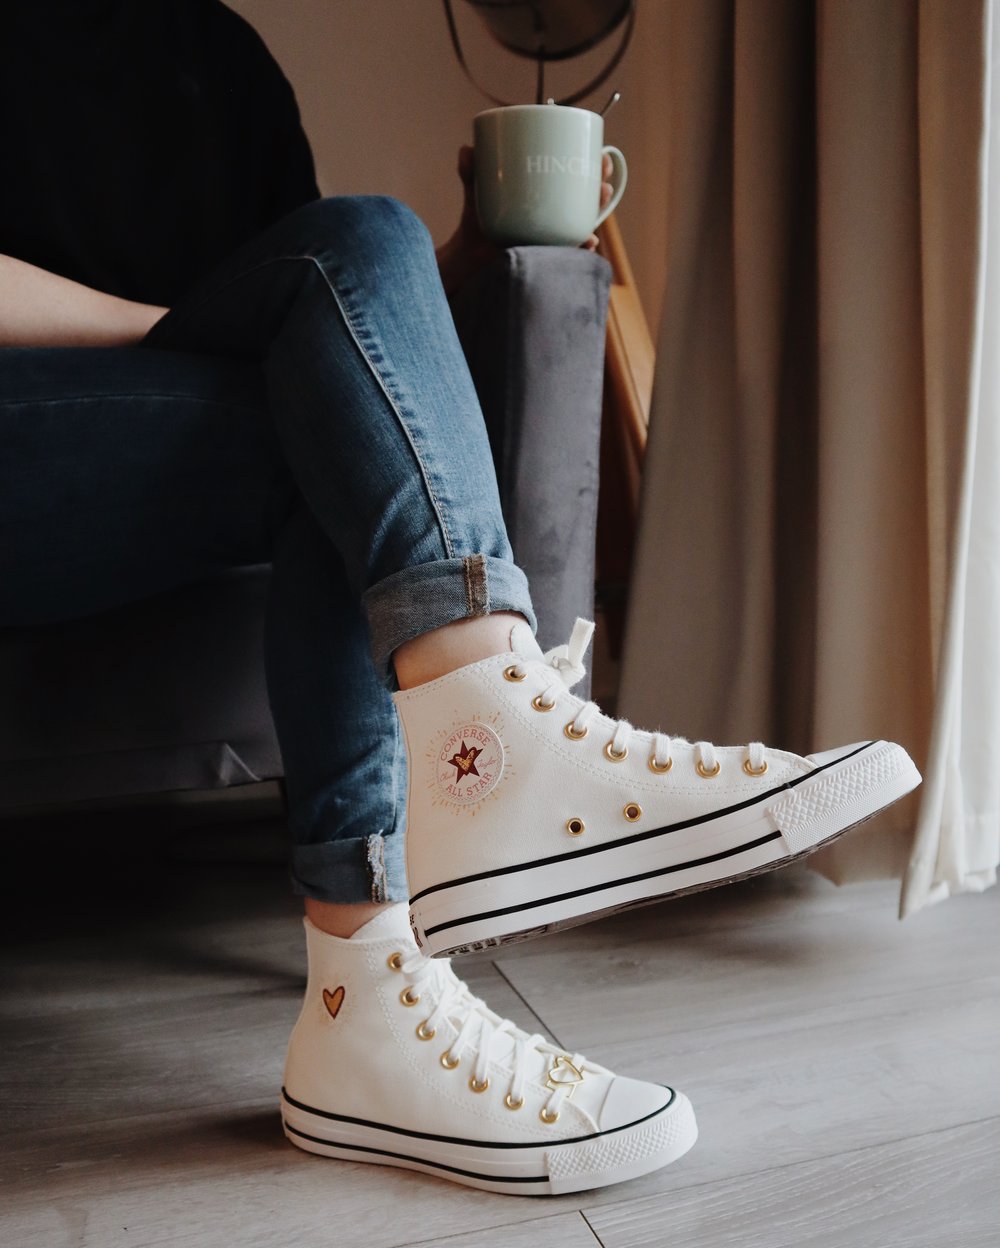 Converse Valentine's Day-inspired collection | Limited edition collection  for Converse lovers